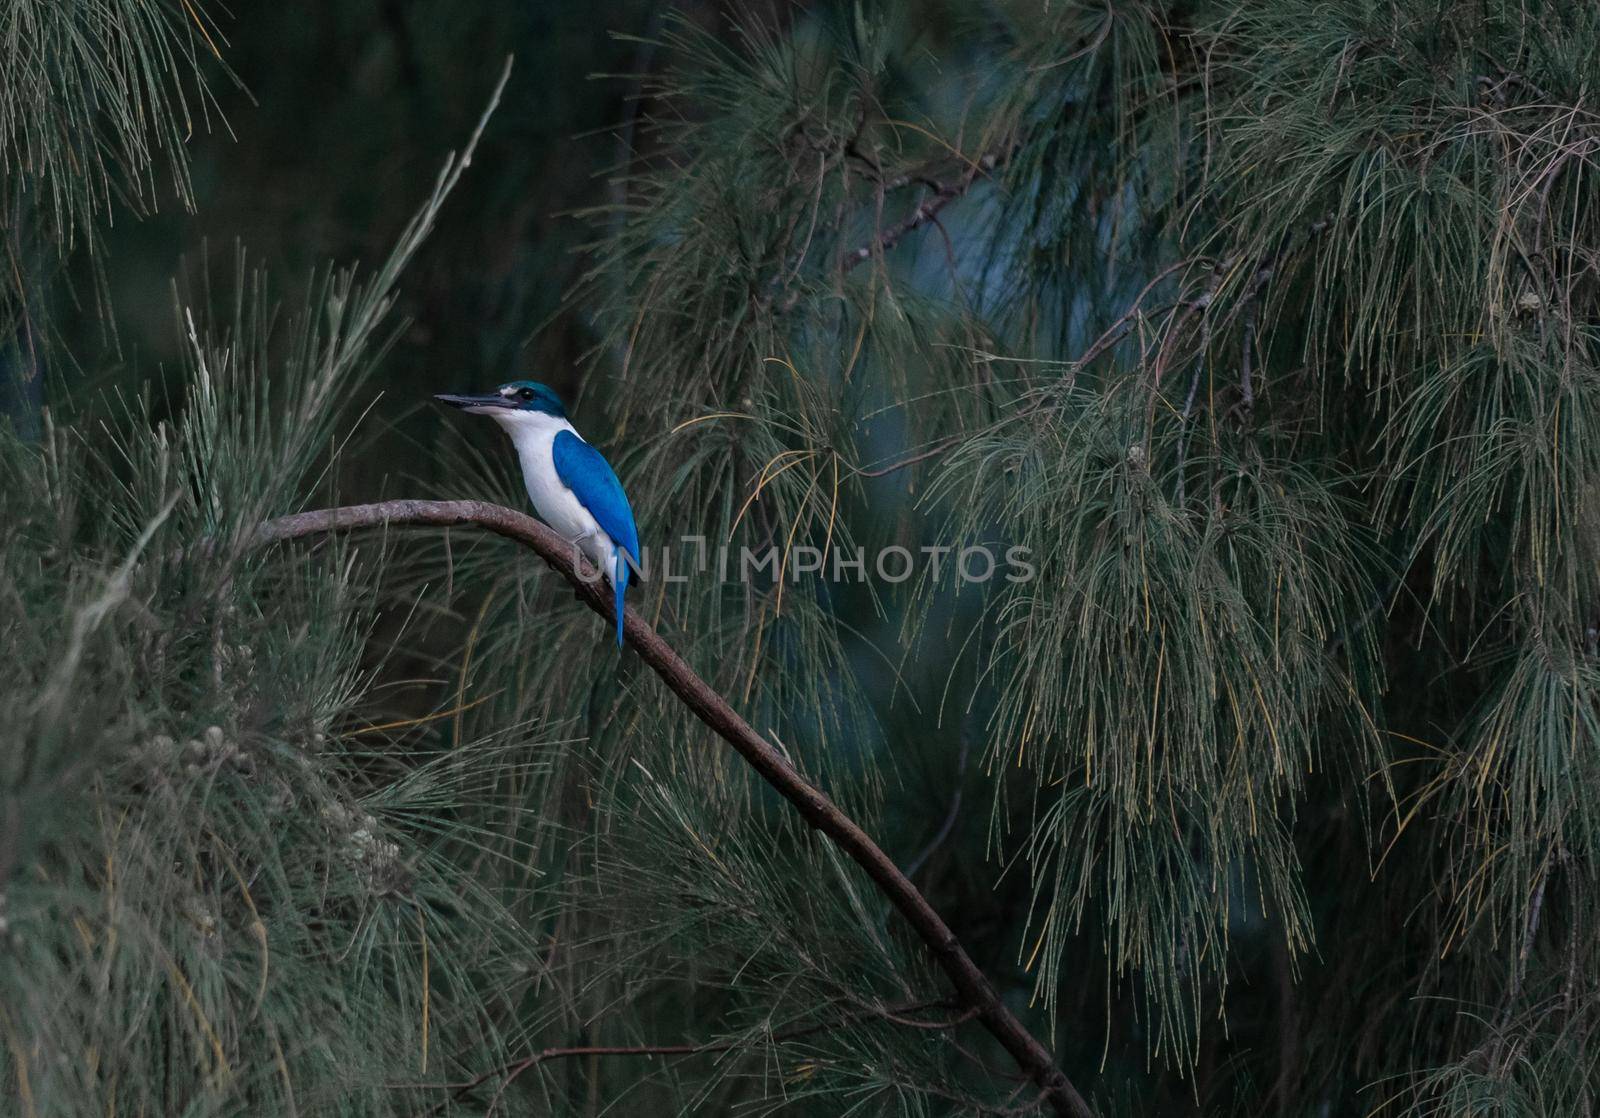 The Collared Kingfisher (Todiramphus chloris) standing on a branch. by sirawit99